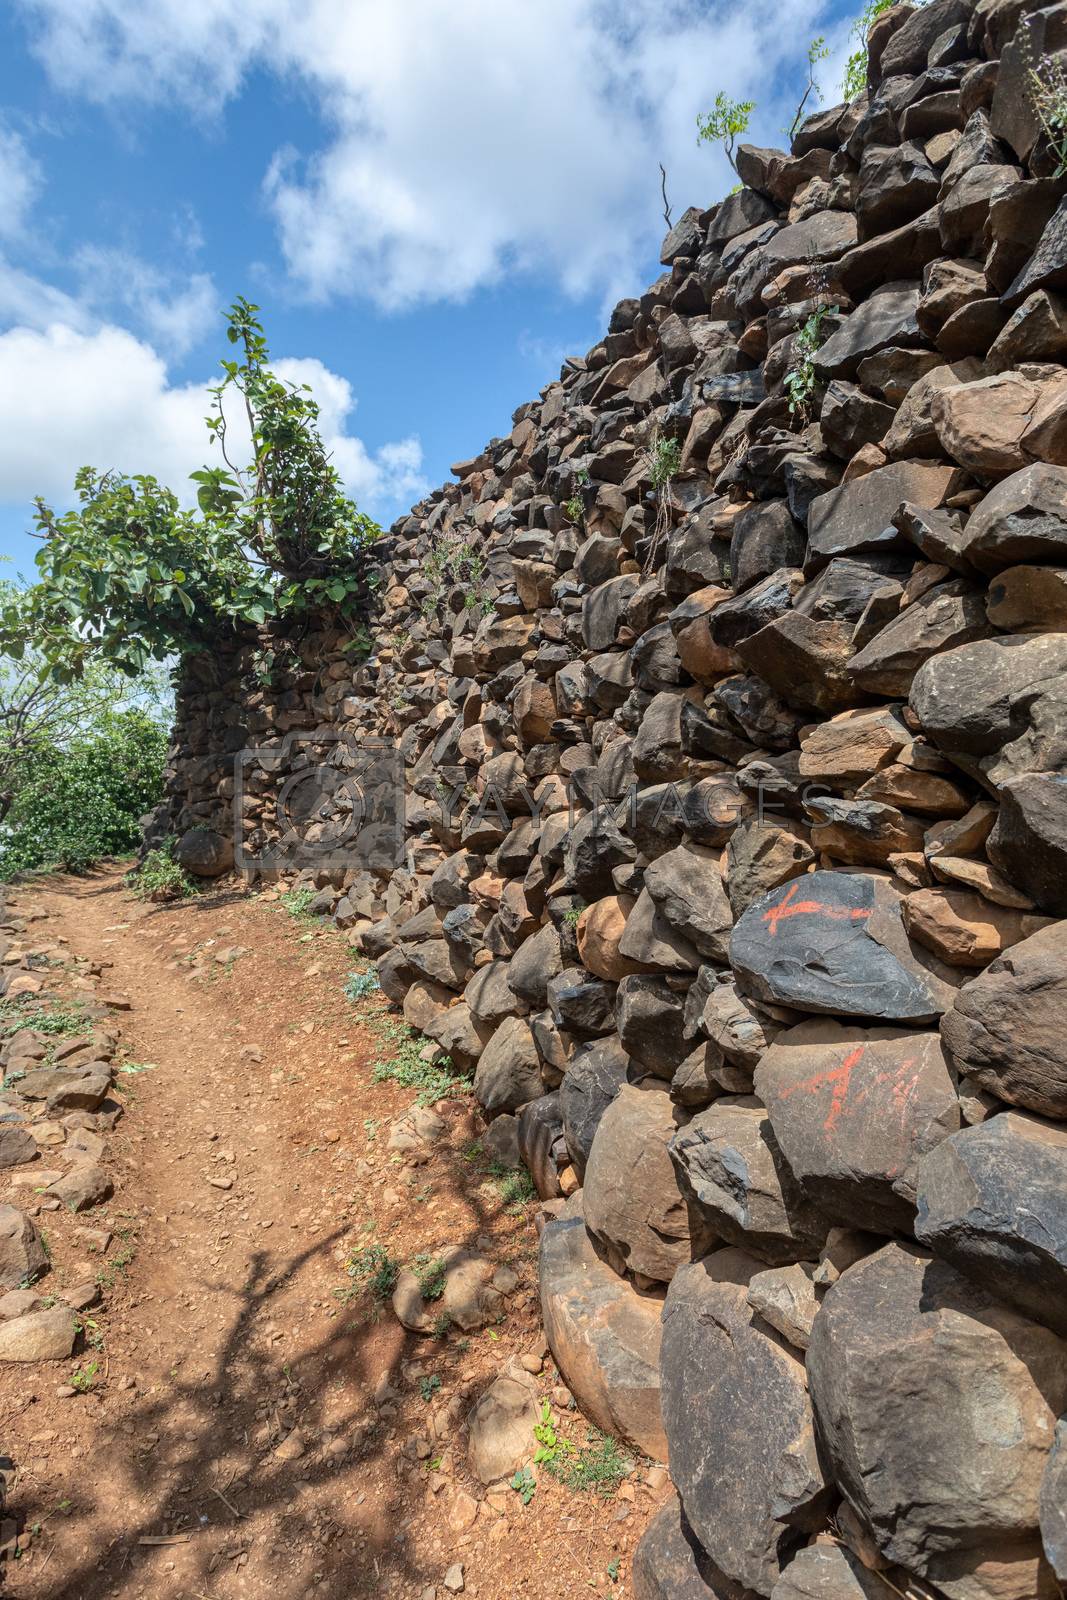 Royalty free image of path in walled village tribes Konso, Ethiopia by artush